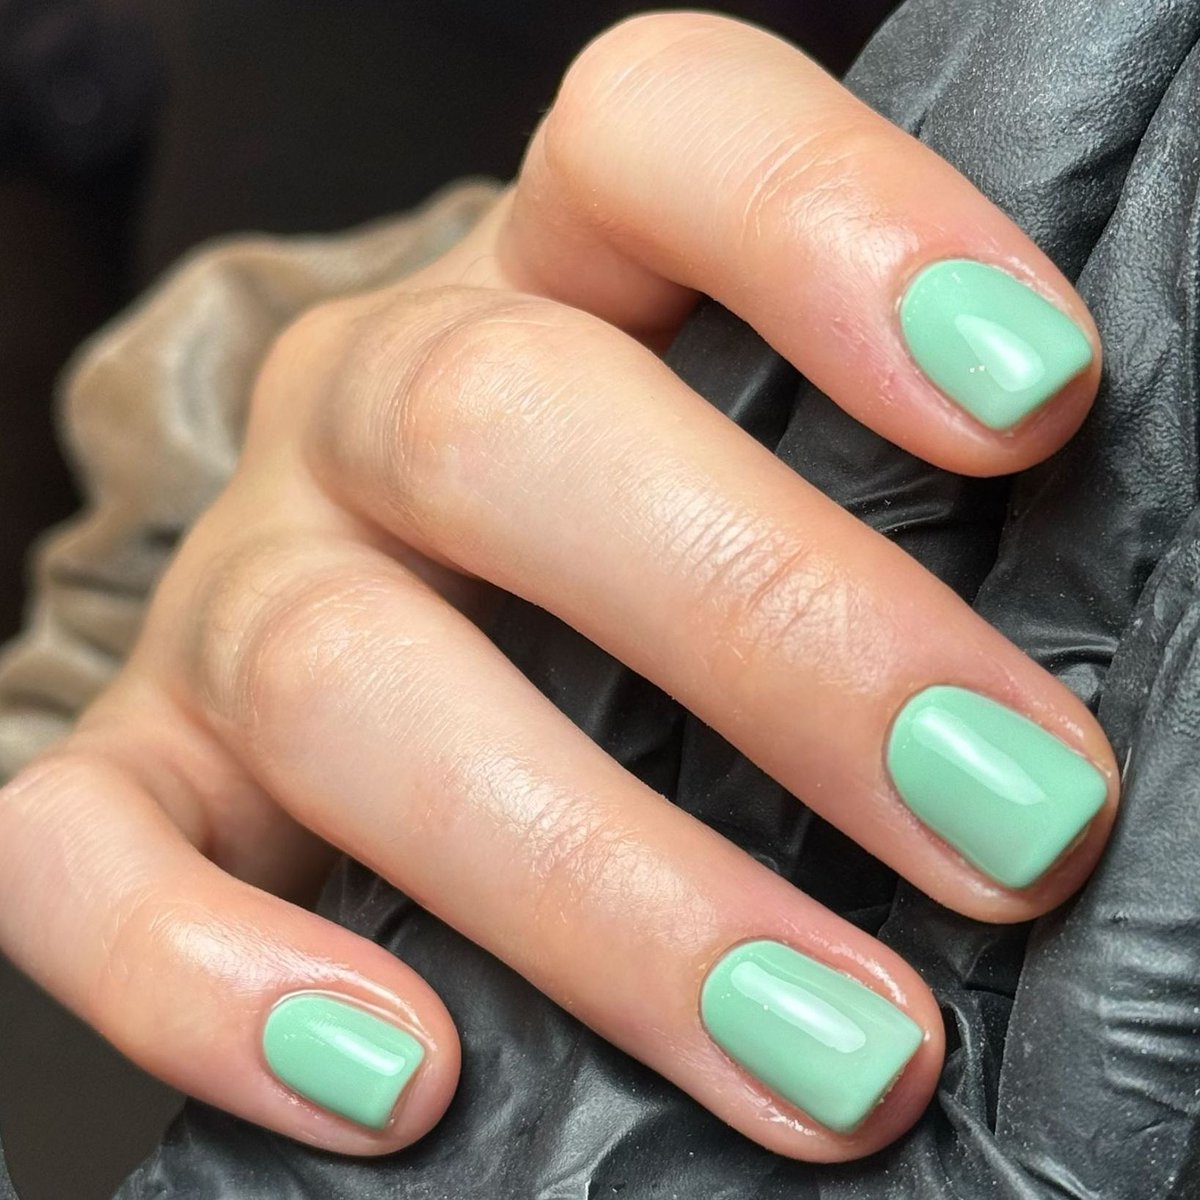 Need some inspiration for your next set? We're loving this green set created by @_beautybyelliemarie using the shade Wild Fern 🍃 

Shop the shade now for Spring! purenails.co.uk/products/halo-…

#greennails #springnails #pastelnails